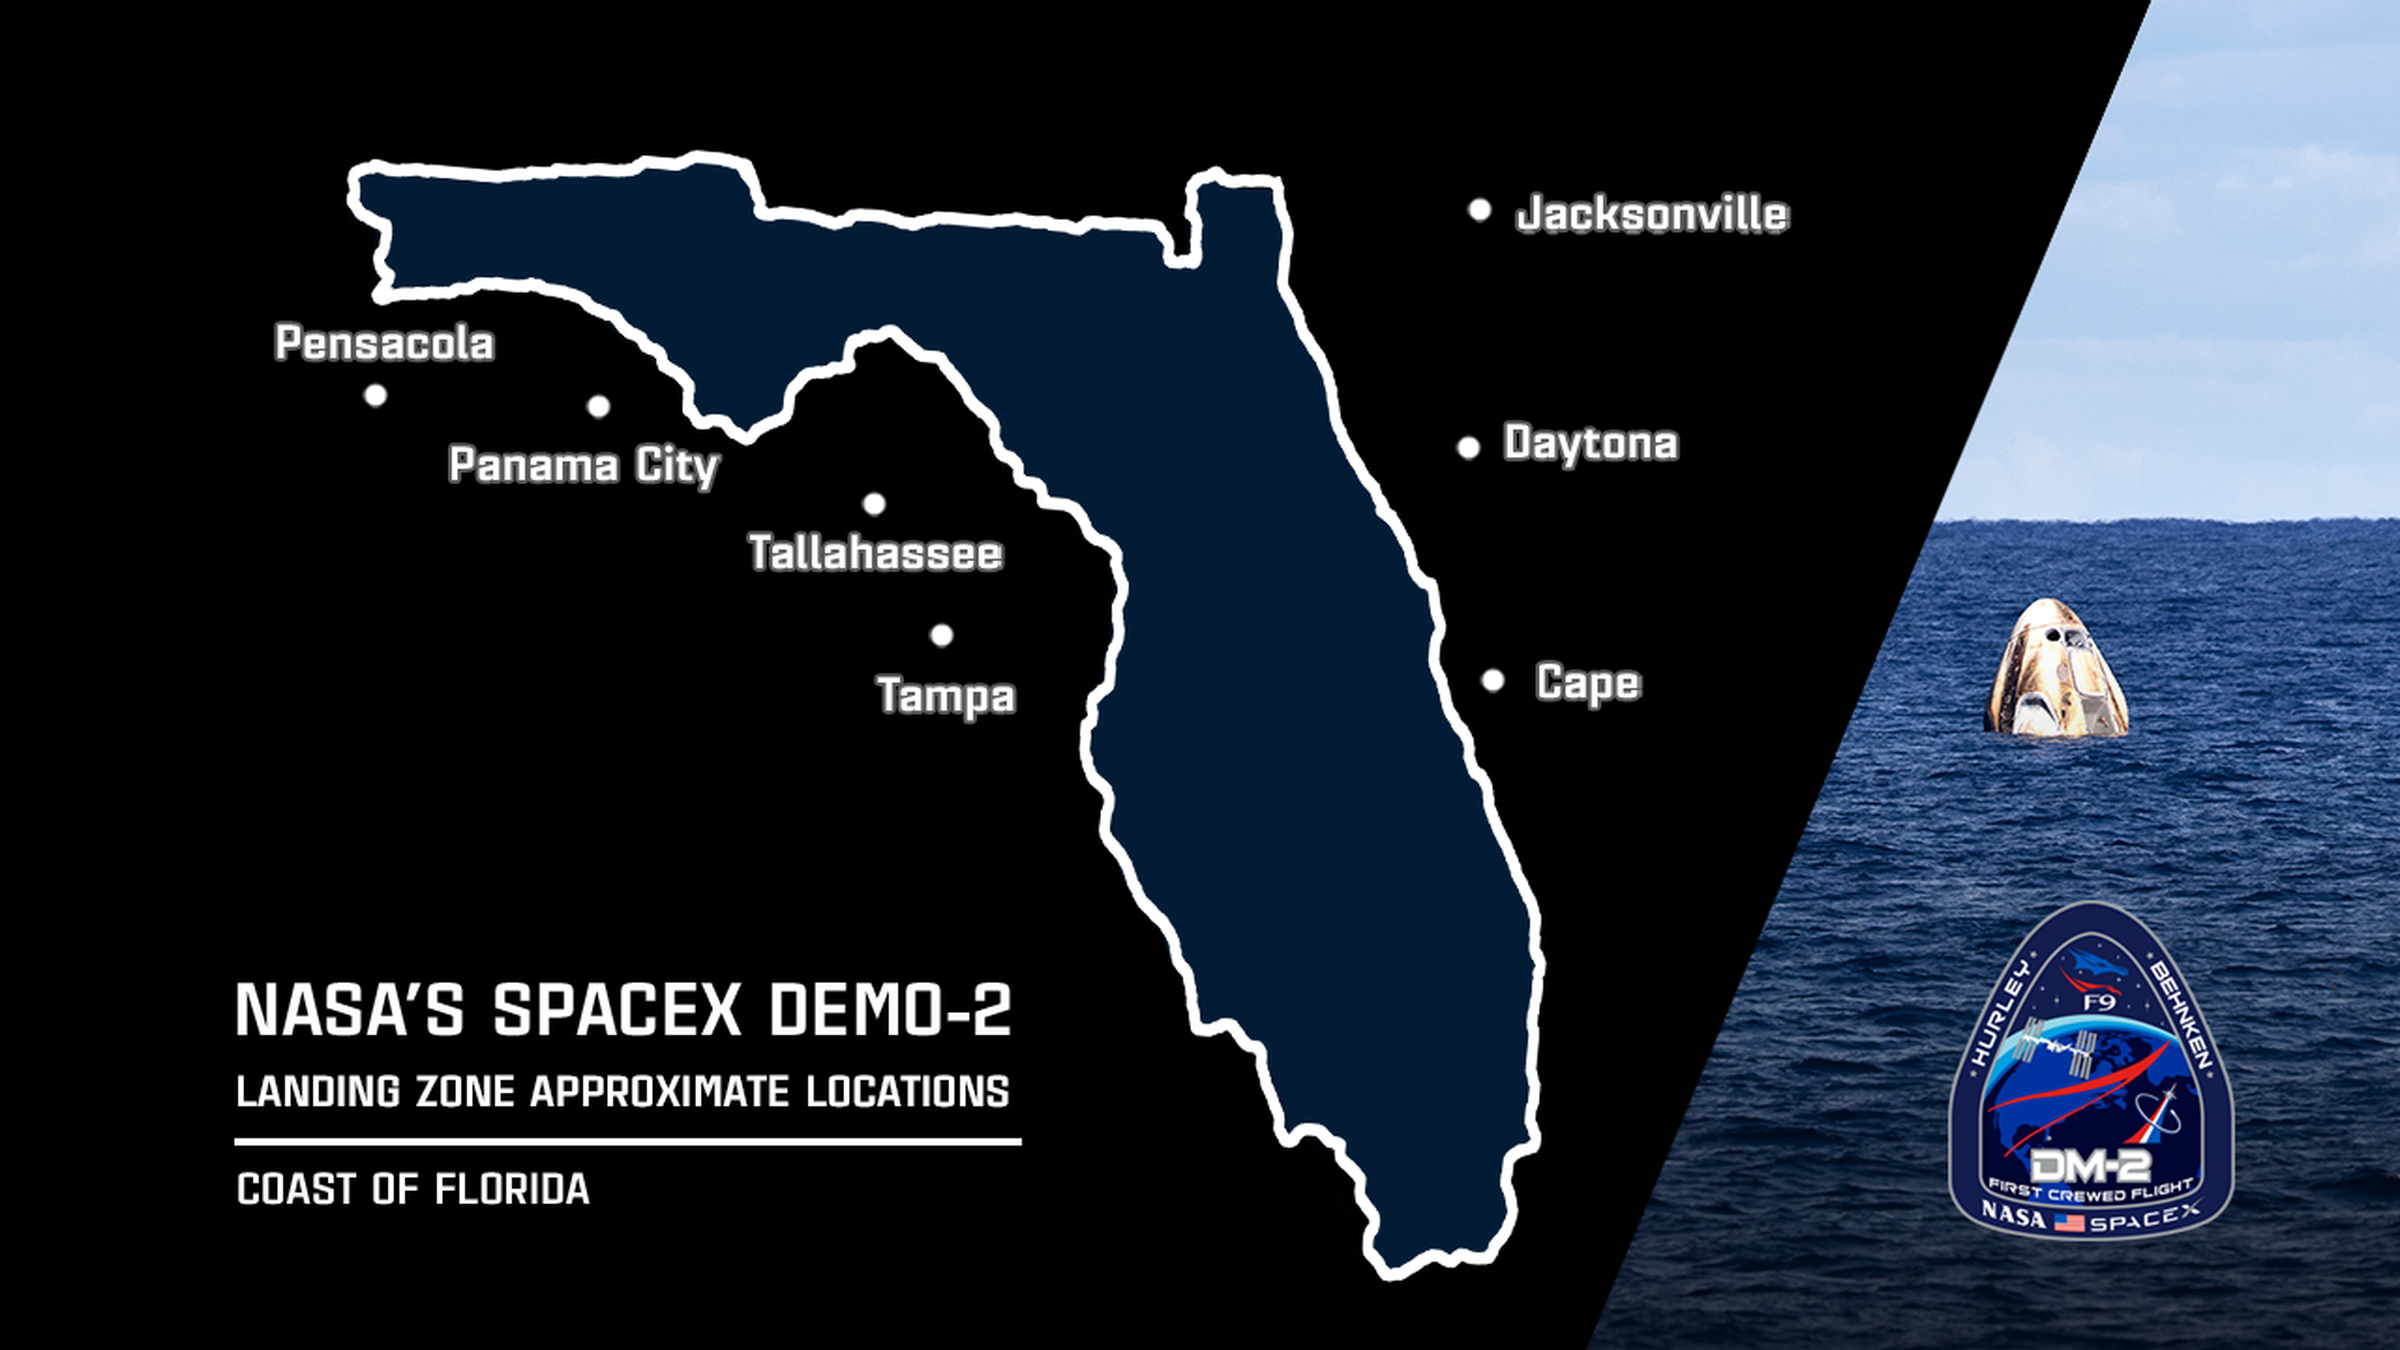 The seven potential landing sites for the Crew Dragon